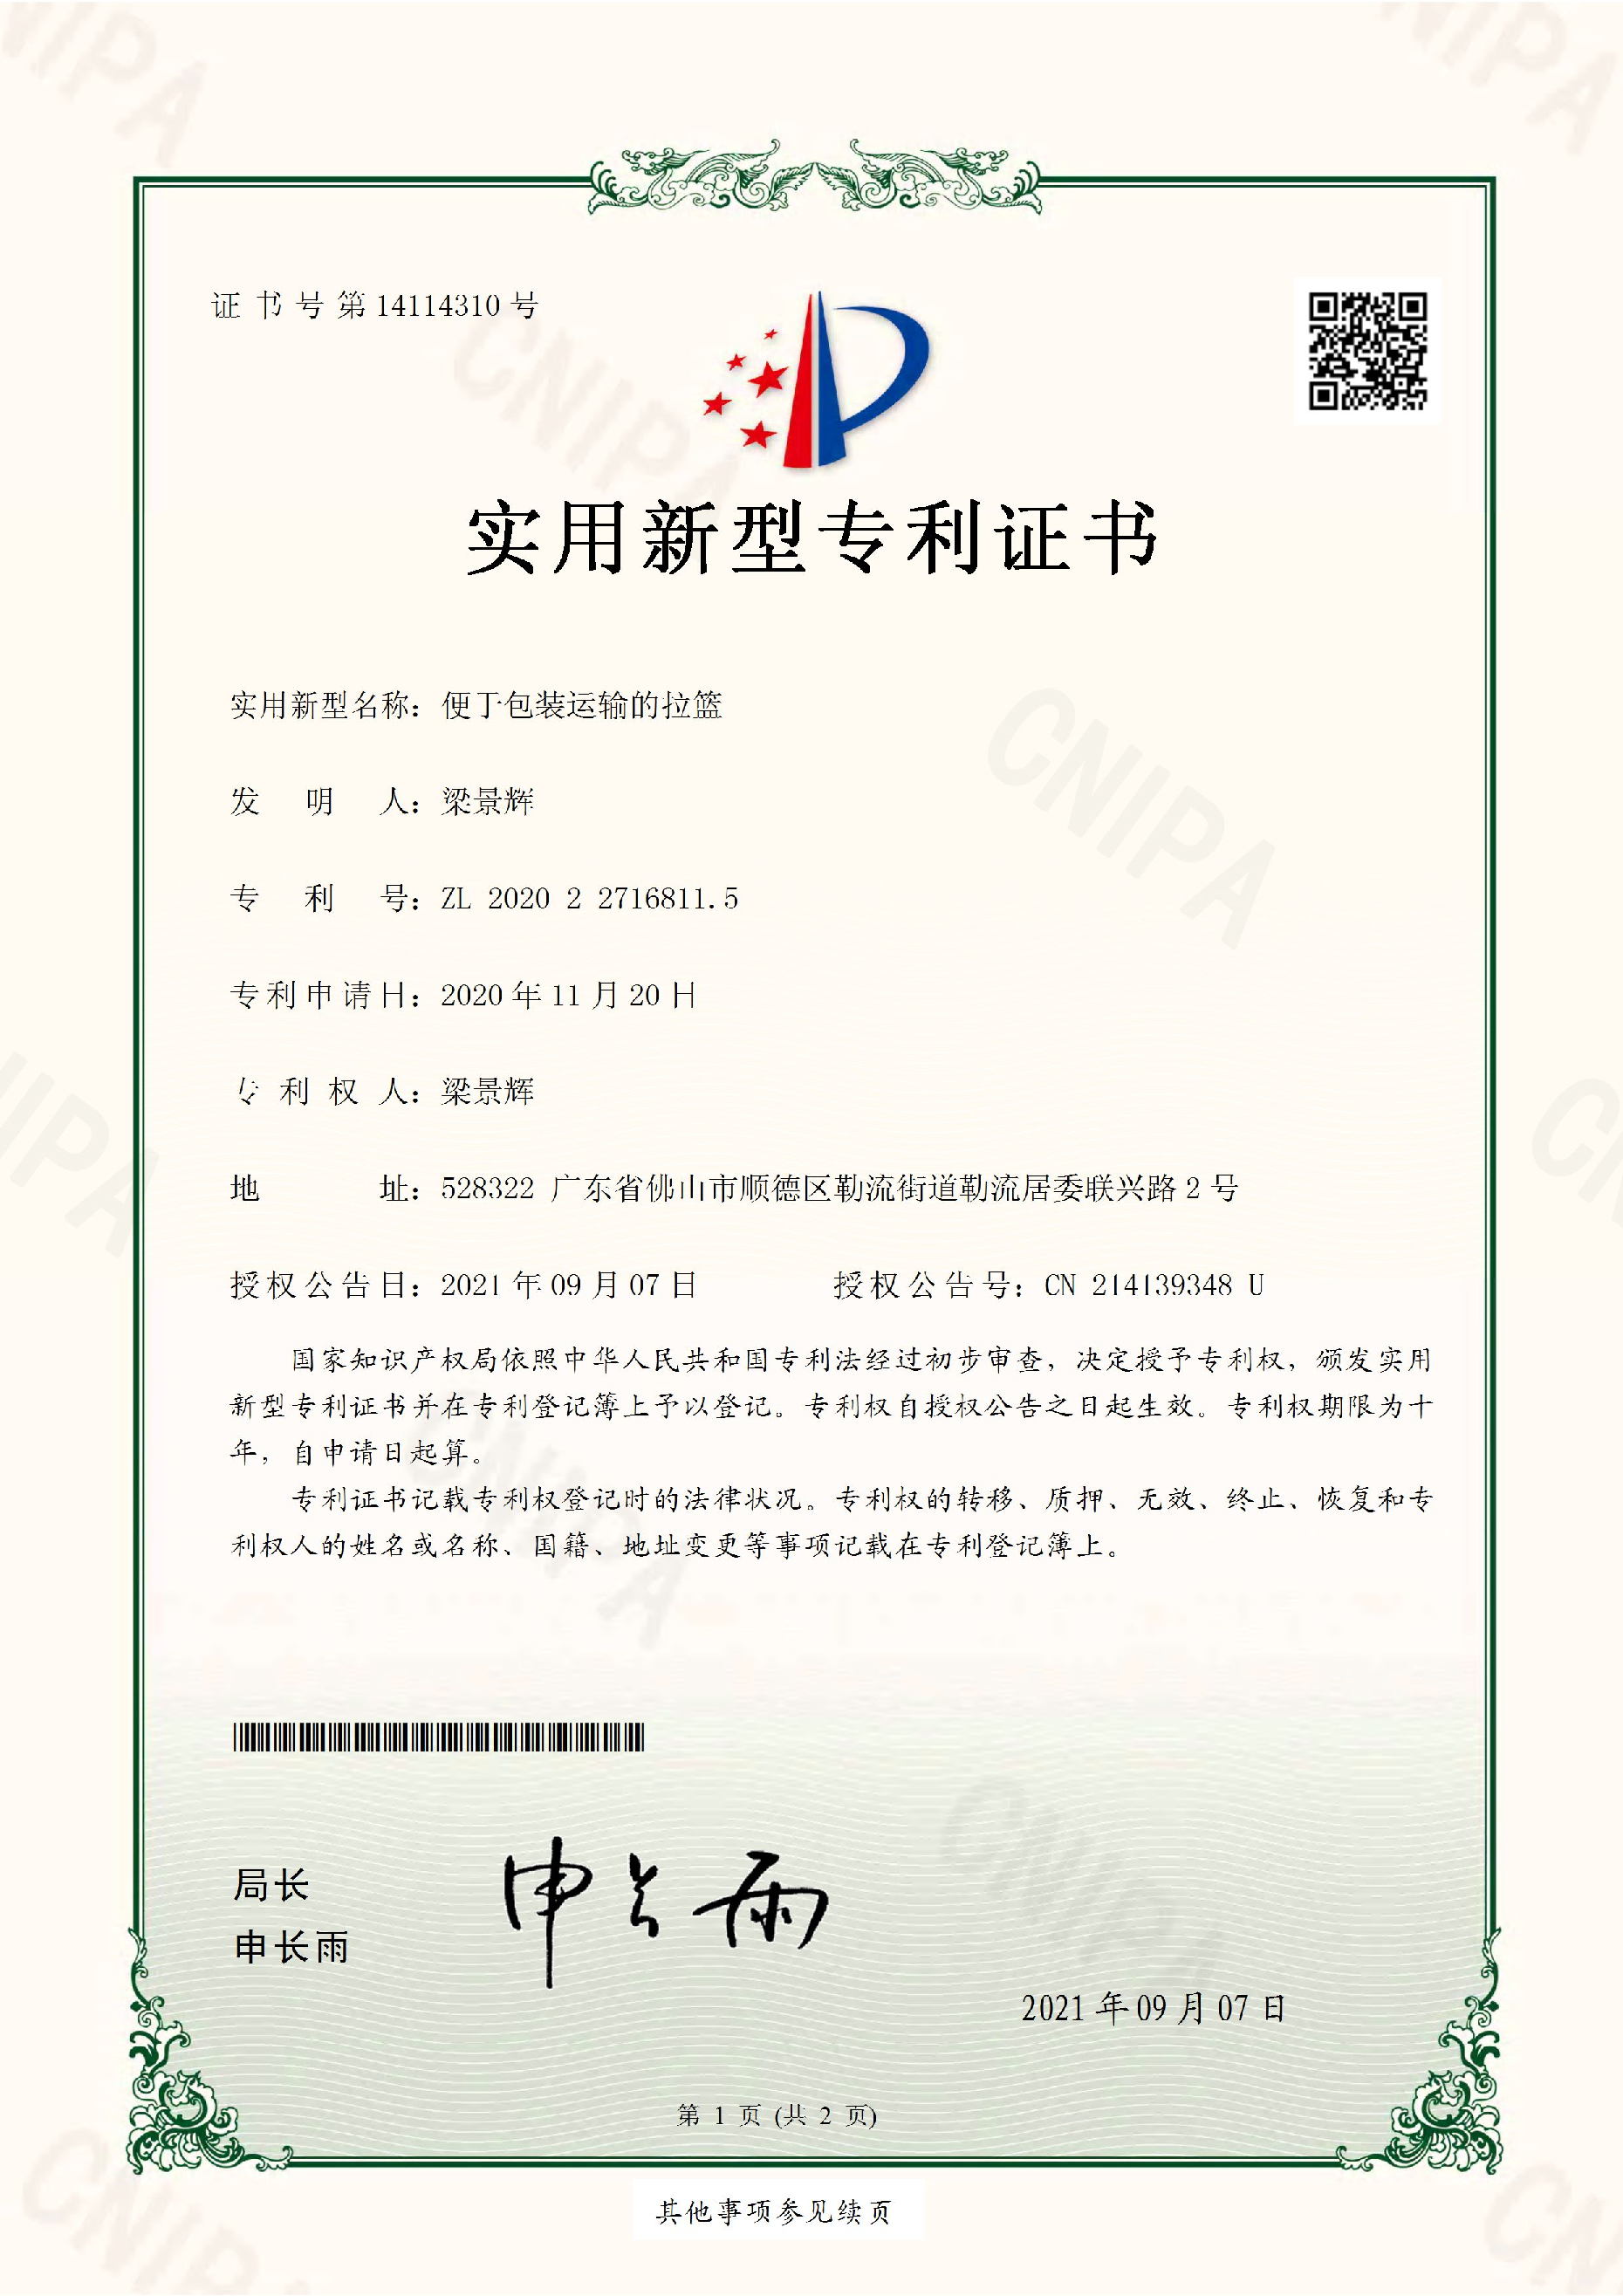 Practical new patent certificate (sign)